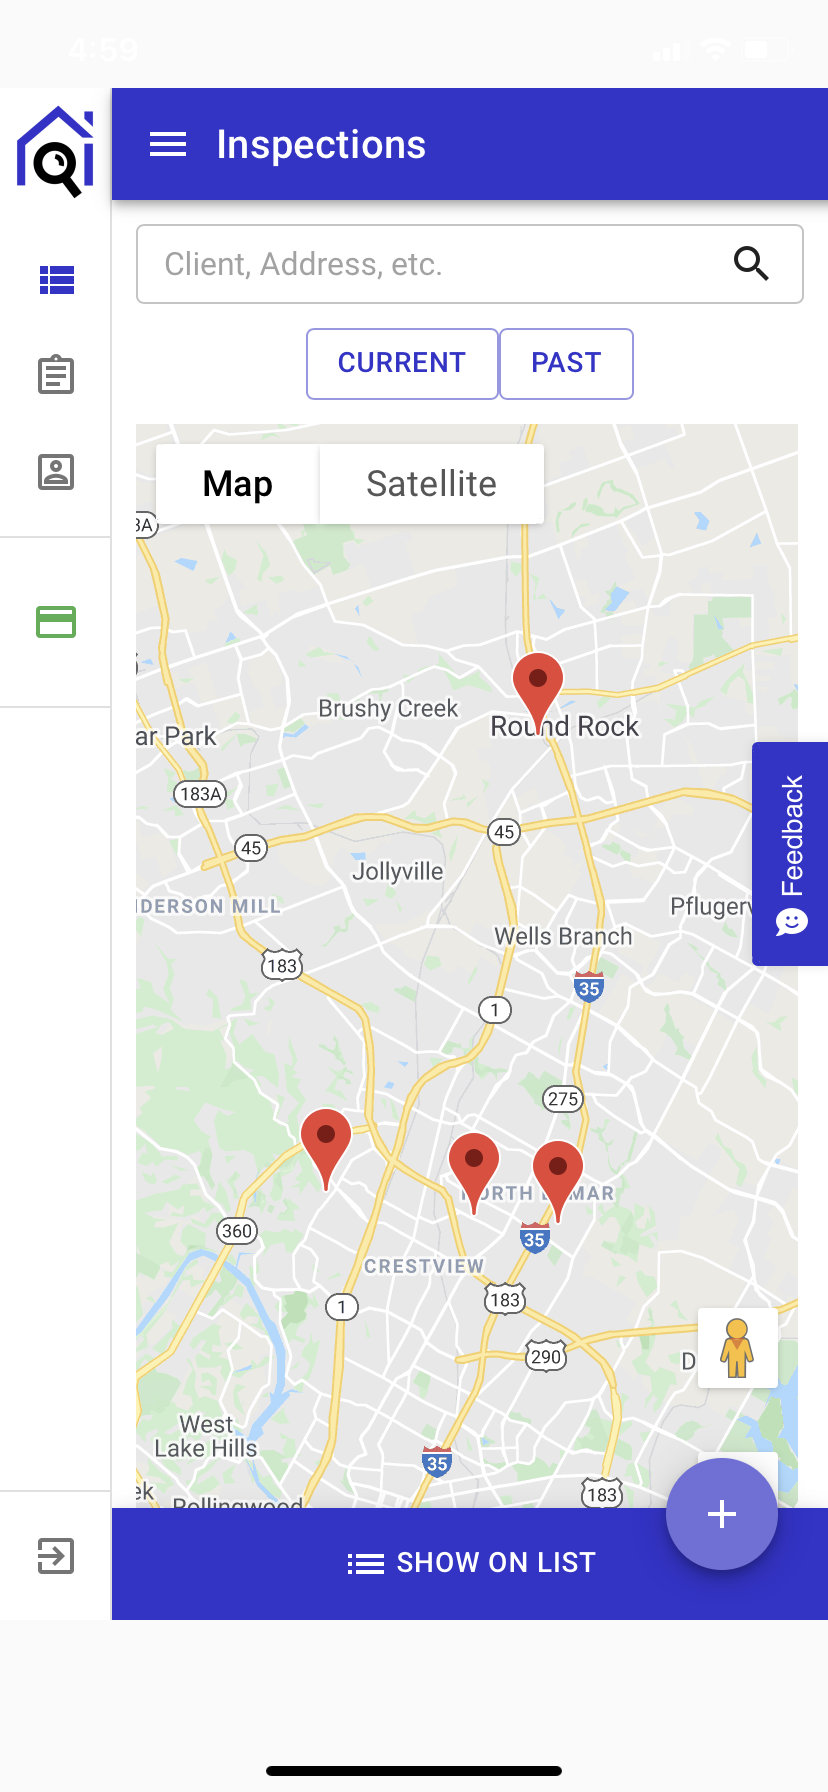 Map view of your inspections. And you can navigate directly from here!